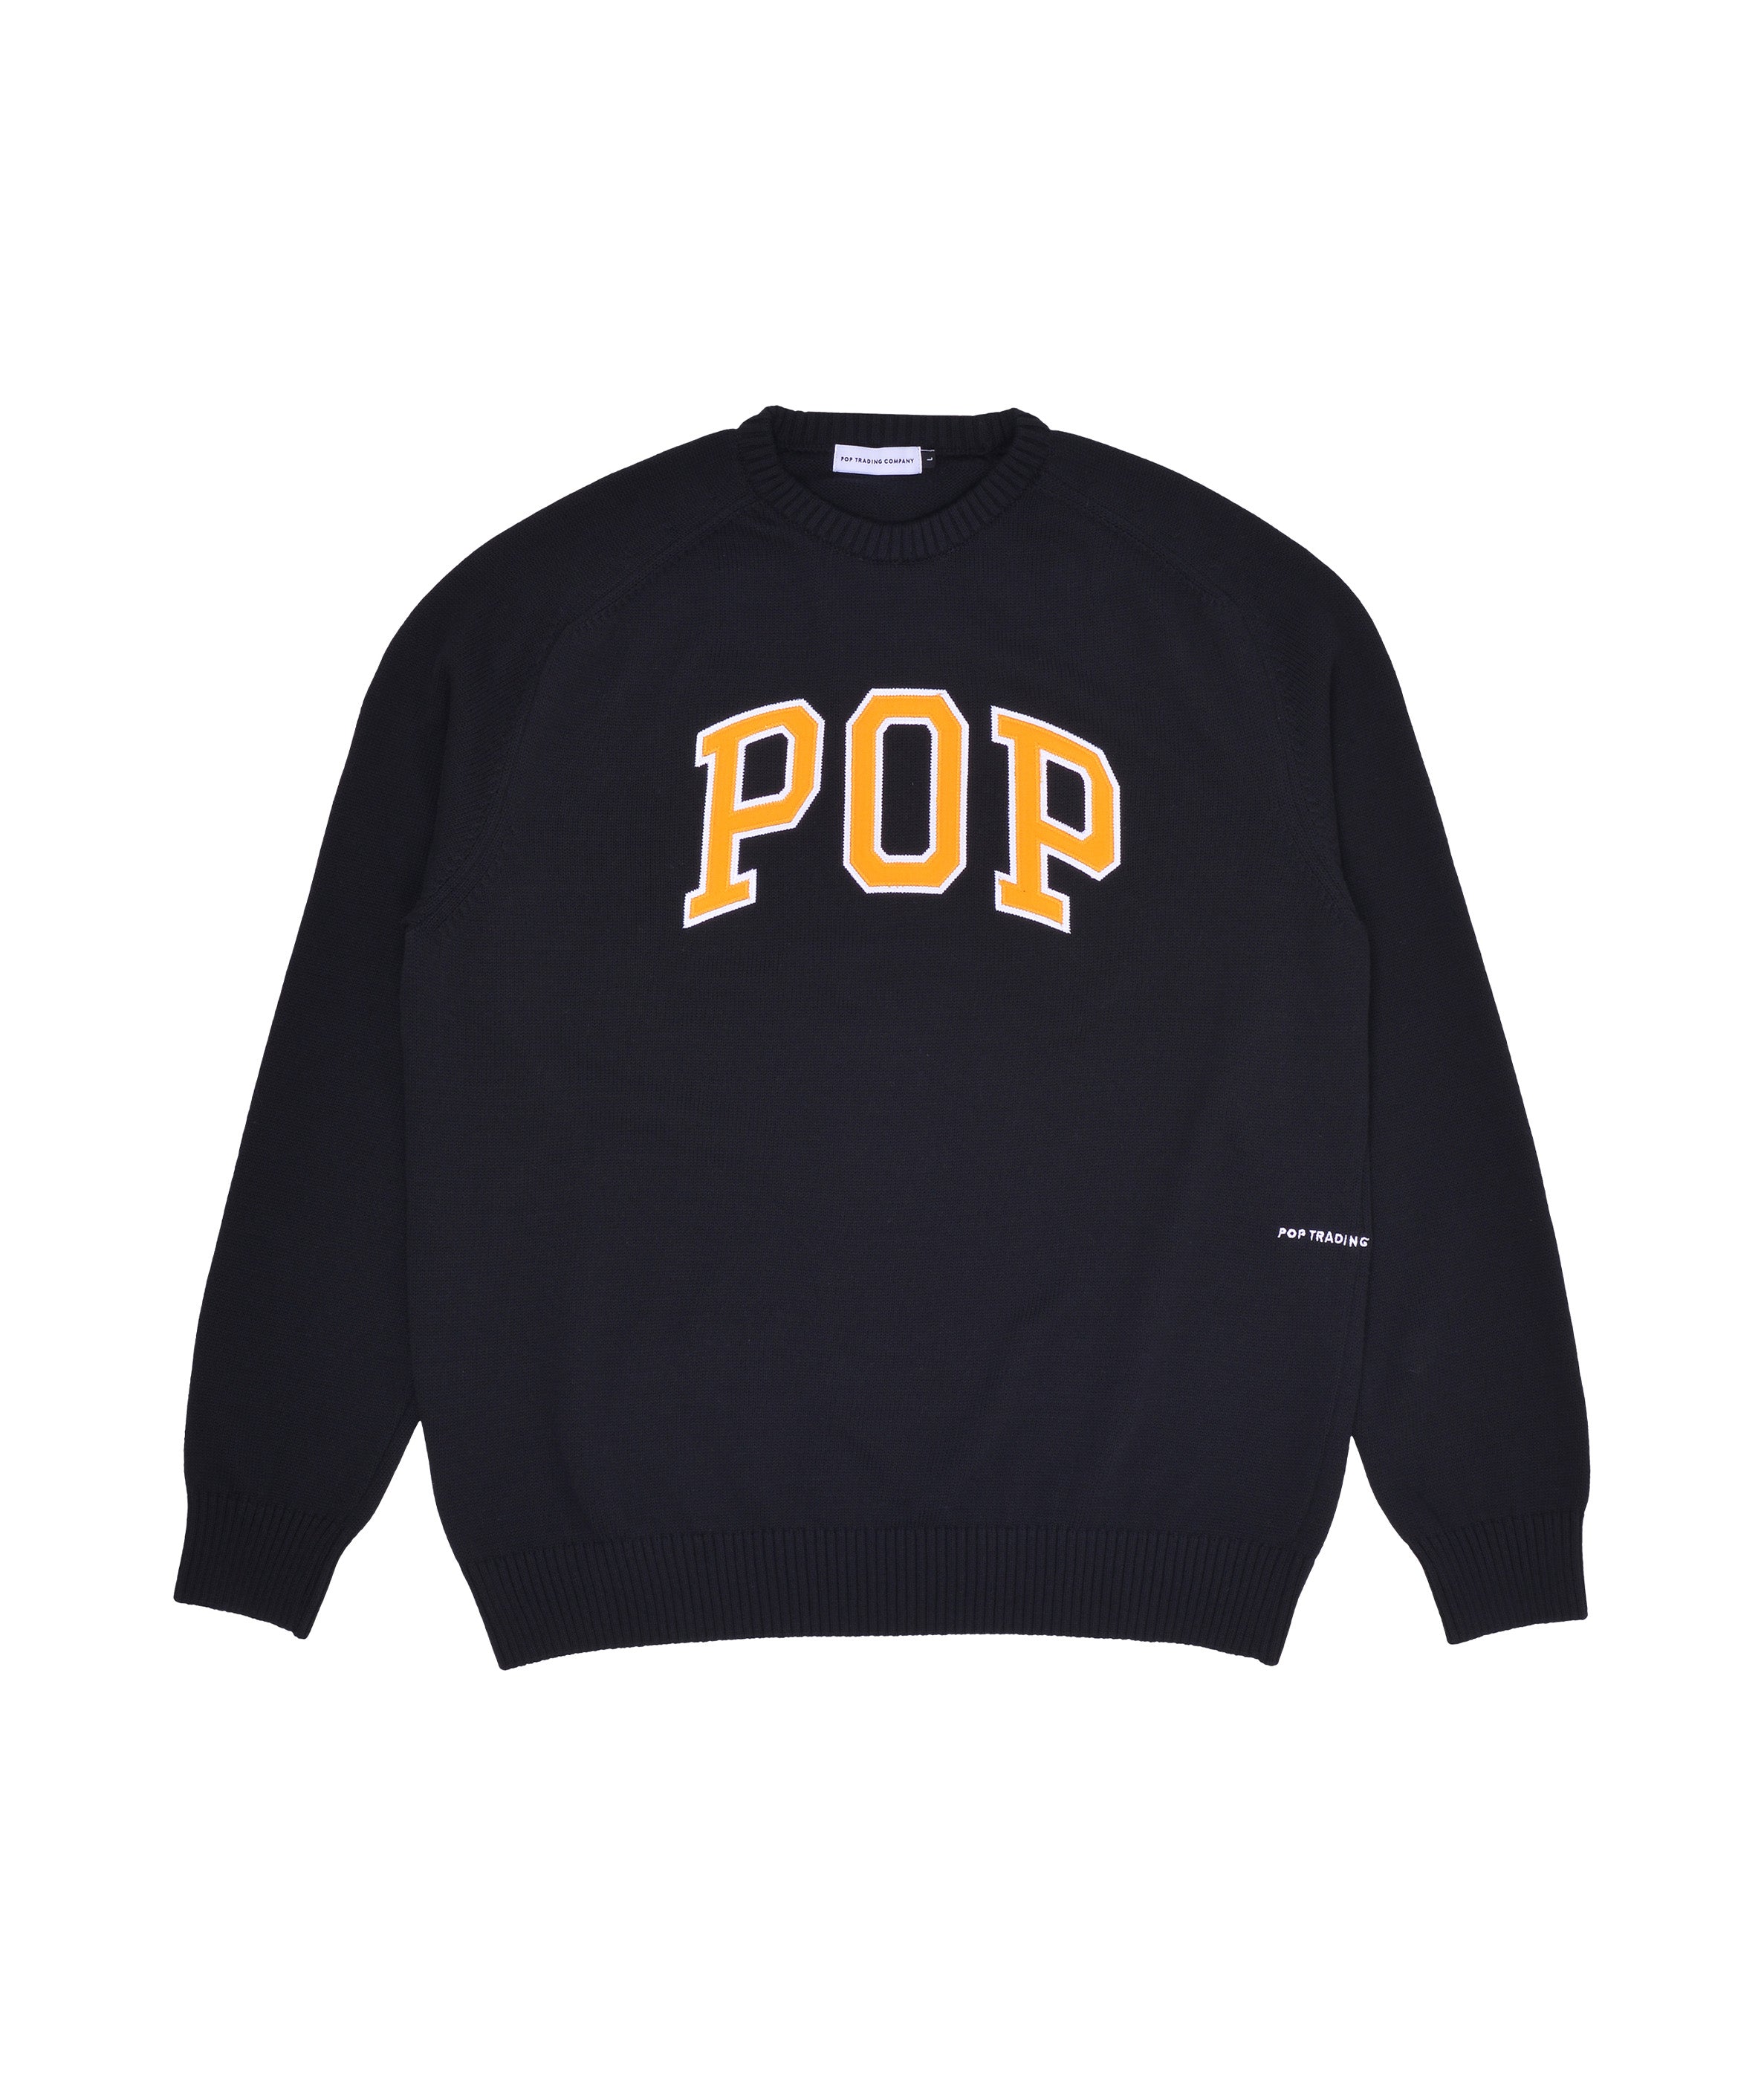 ARCH KNITTED CREWNECK BLACK